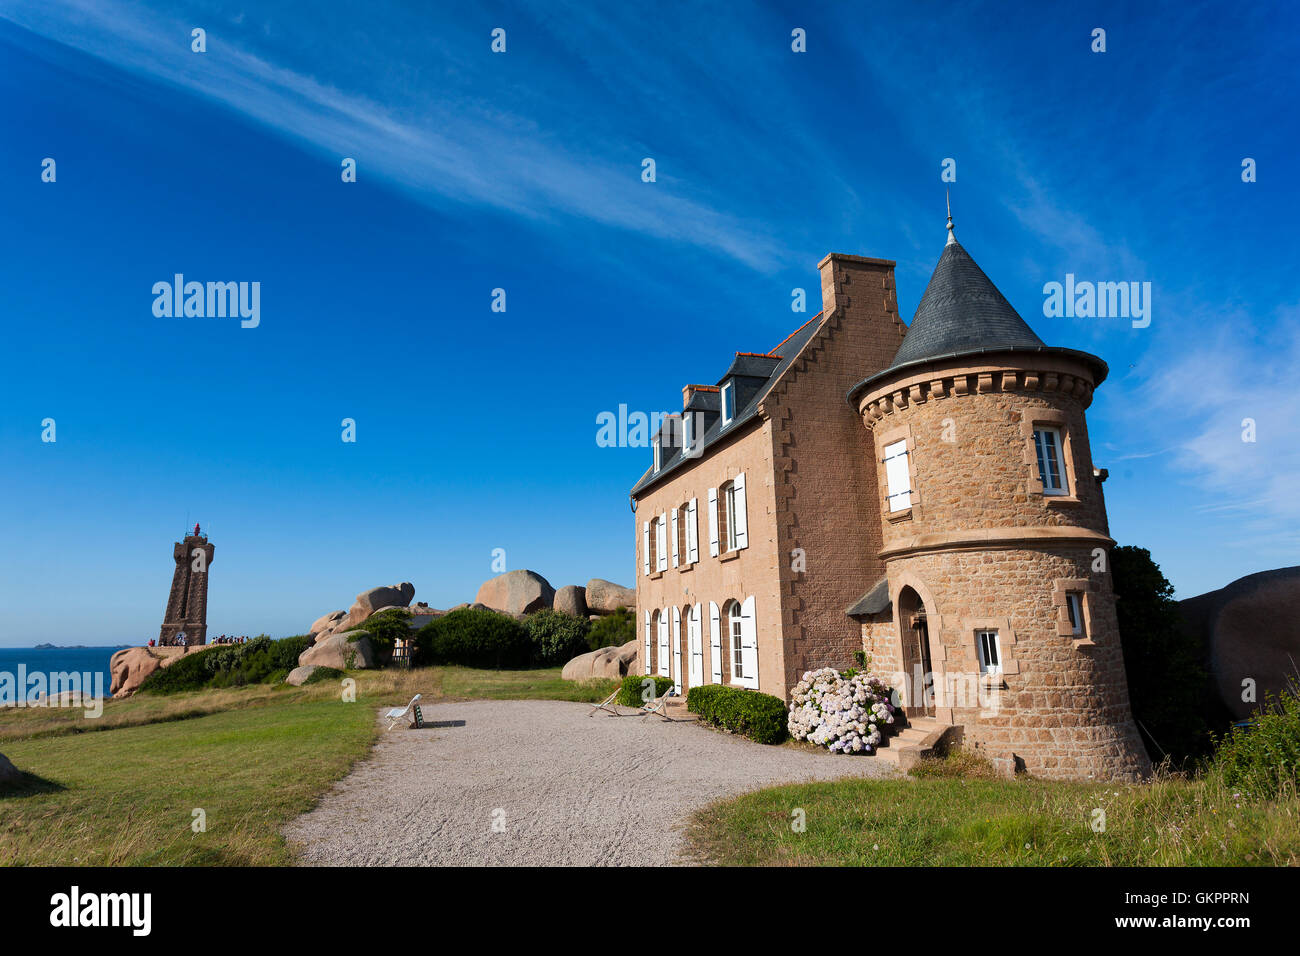 Lighthouse at Cote de Granit Rose, Ploumanach, Brittany, France Stock Photo